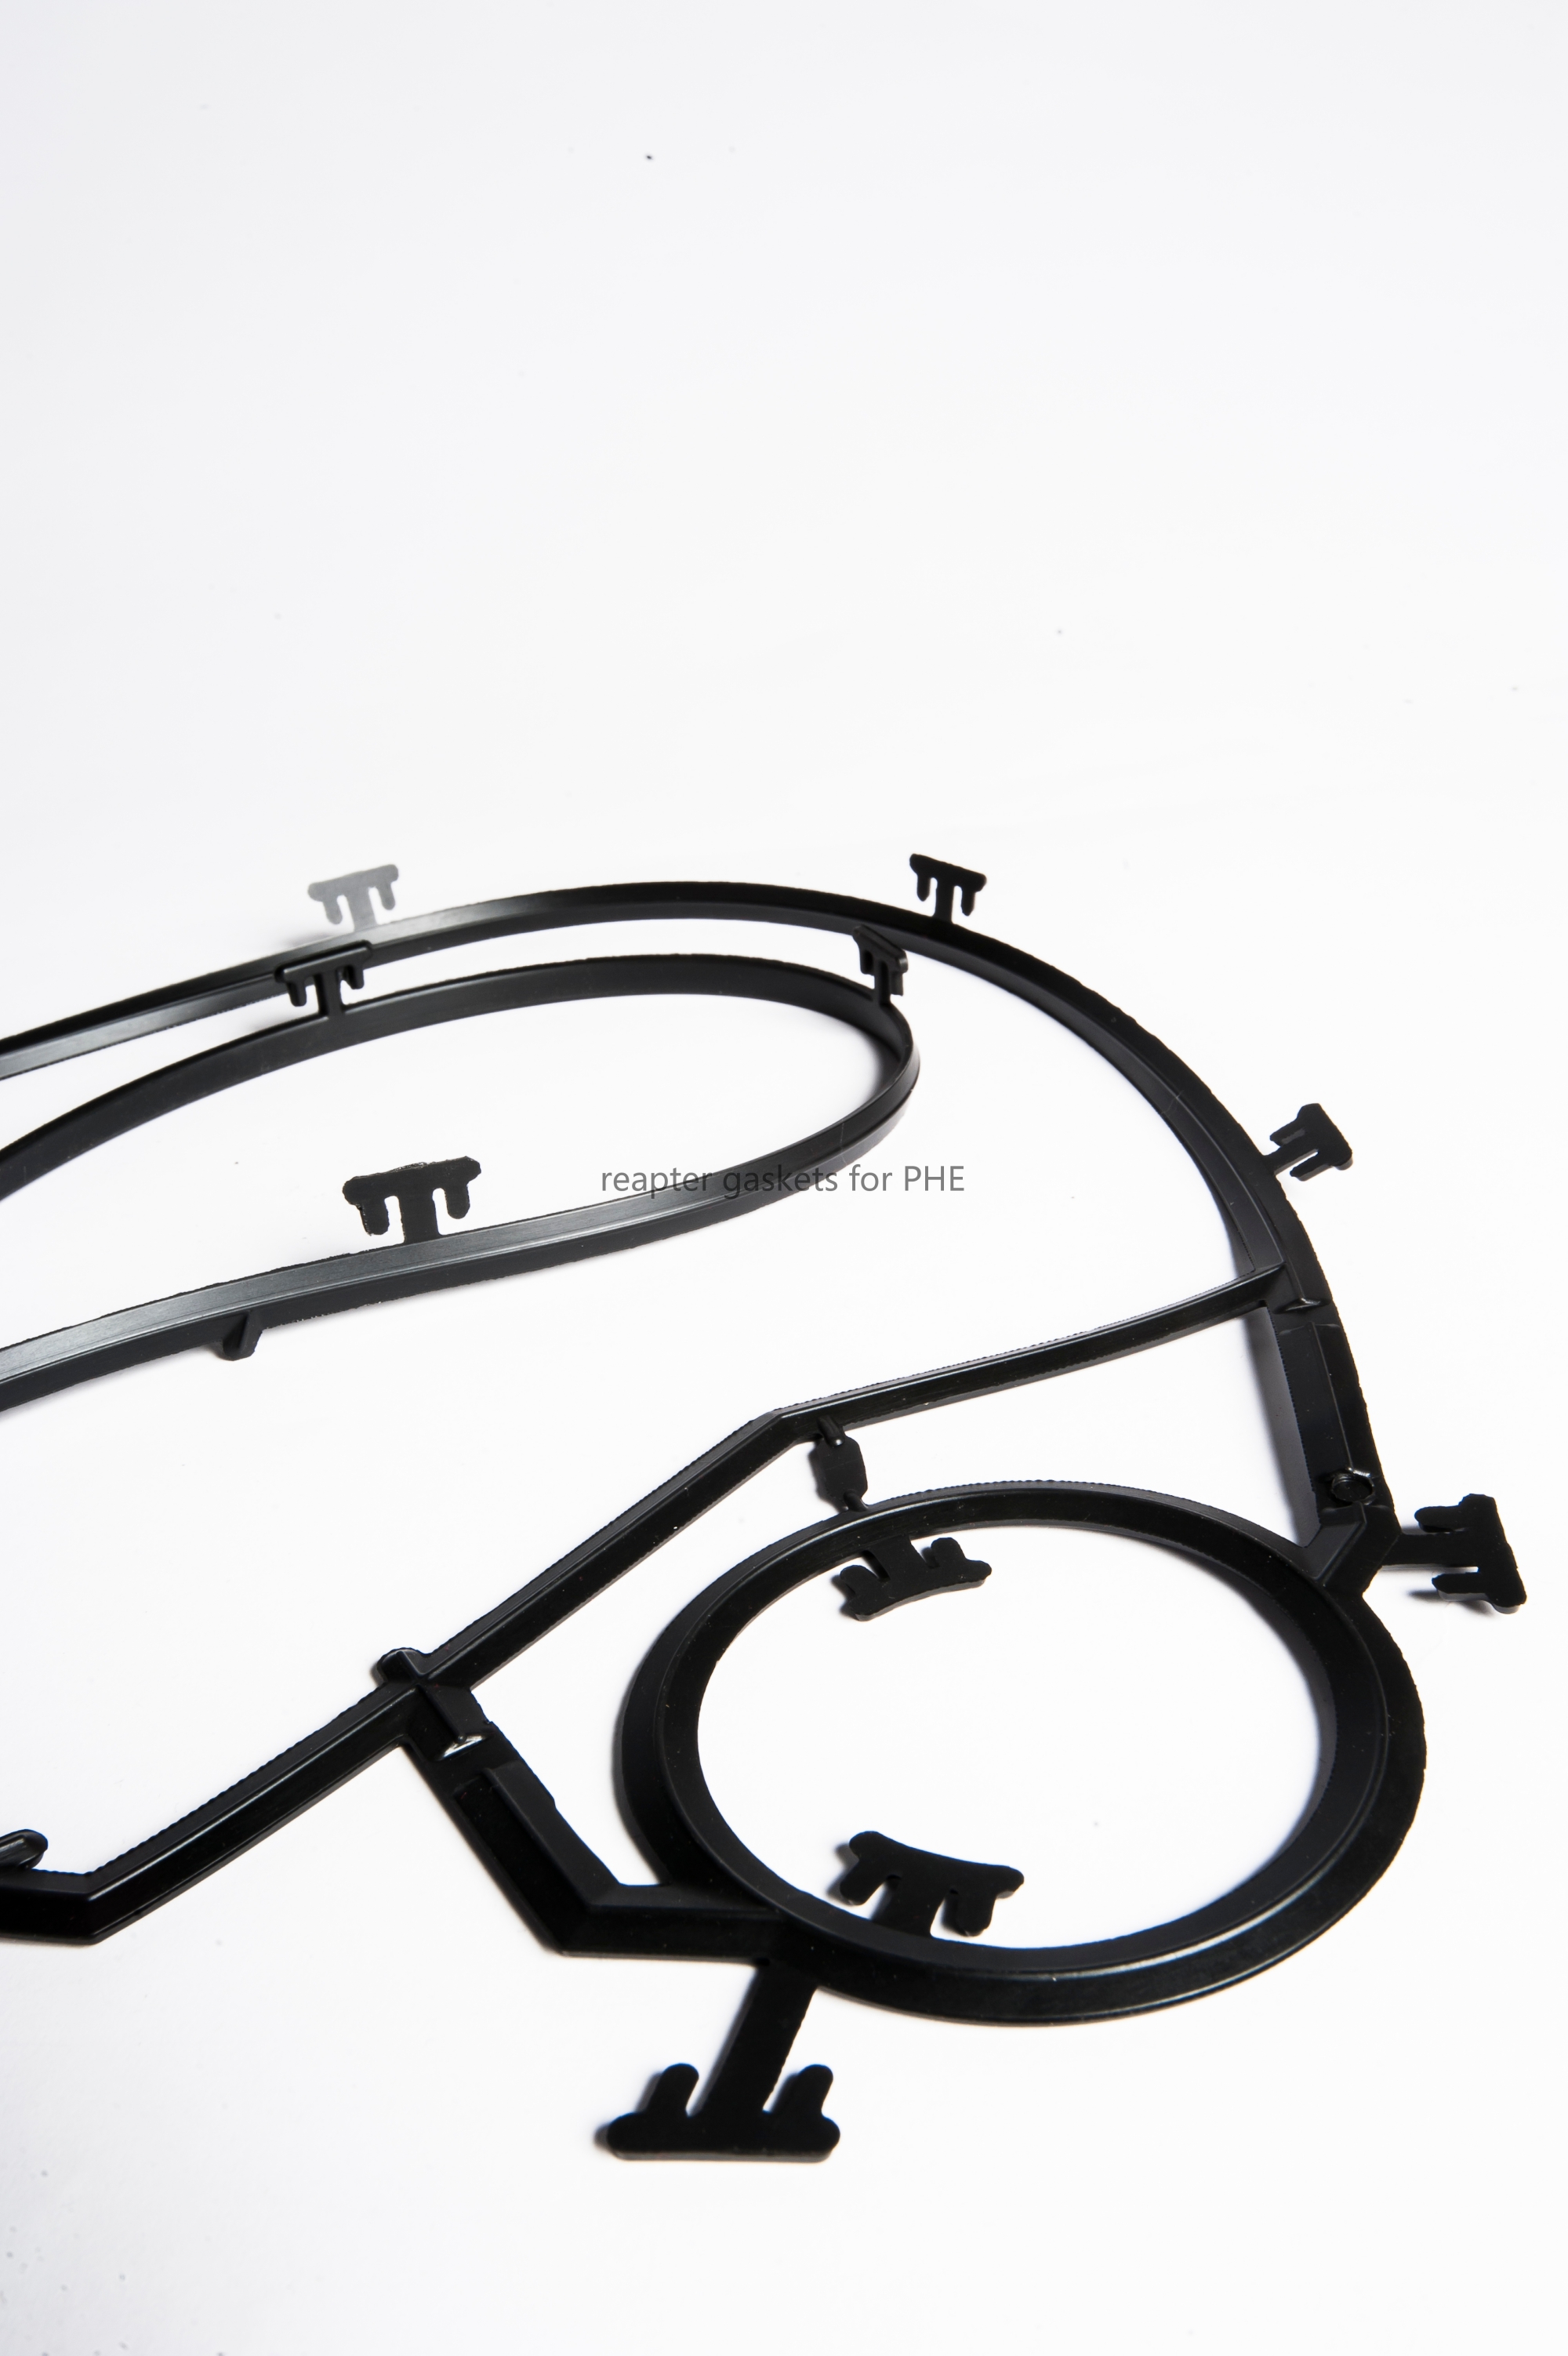 GEA gaskets for PHE (2)